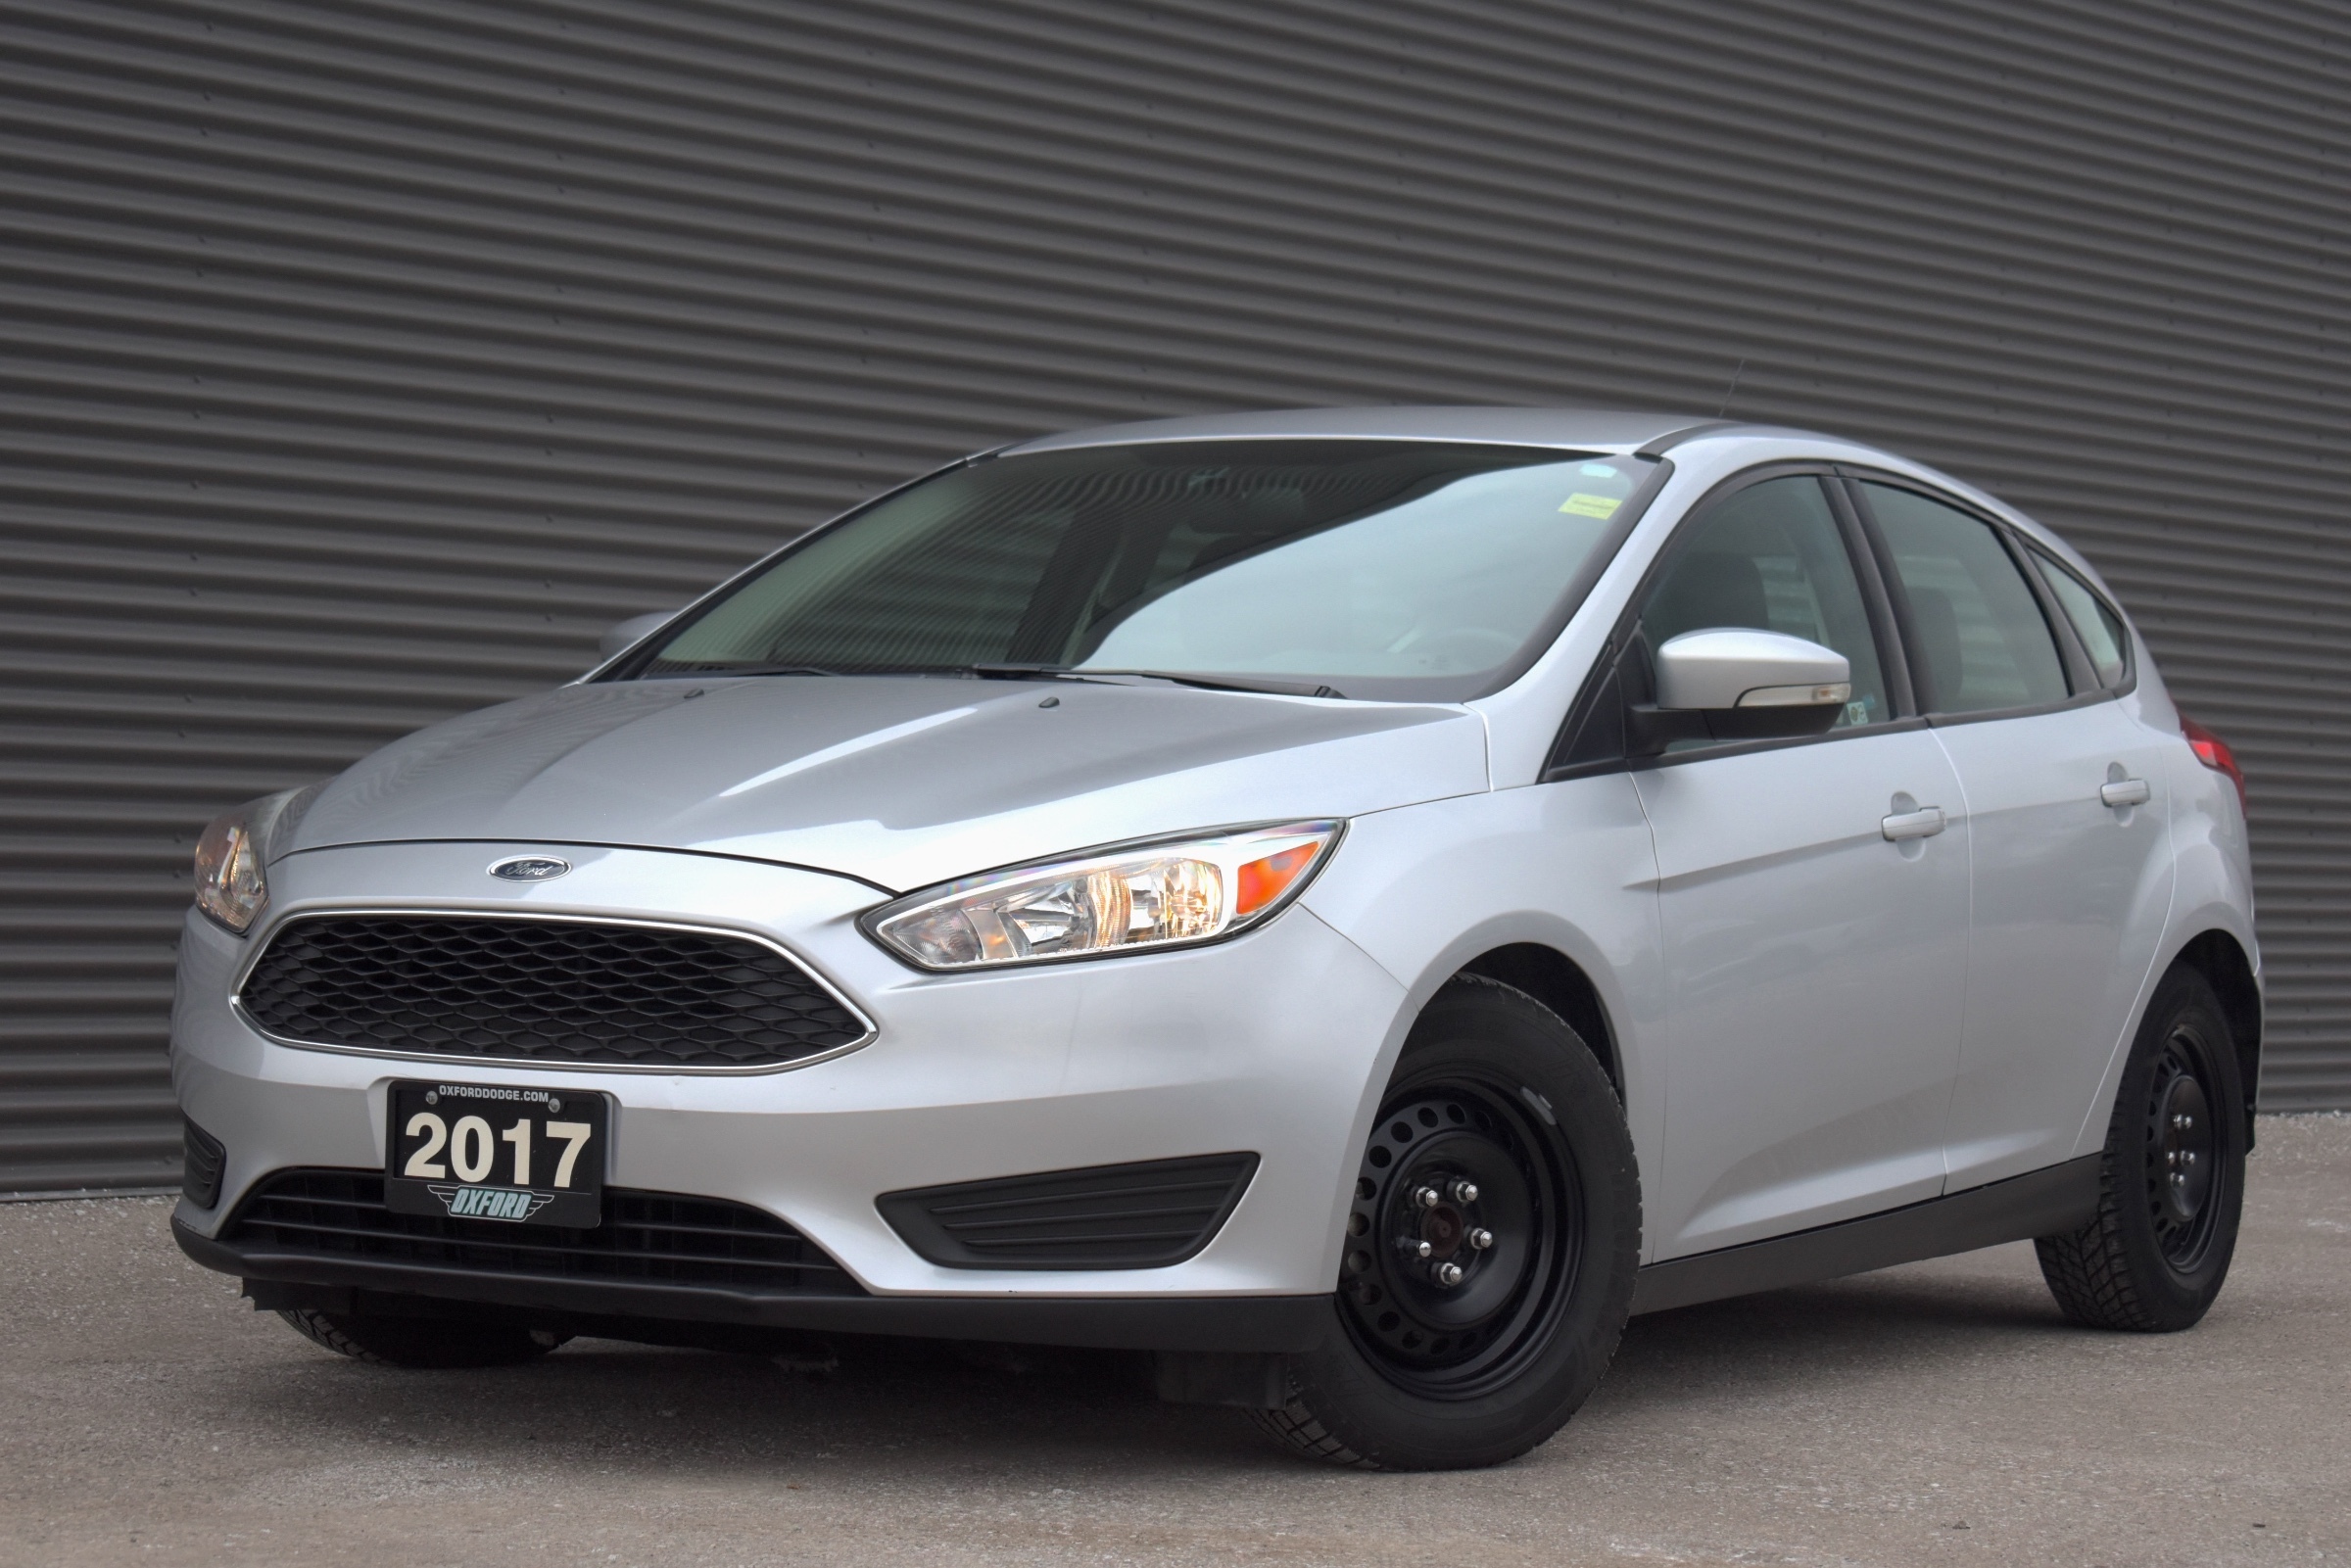 2017 Ford Focus SE Low Kms, One Owner